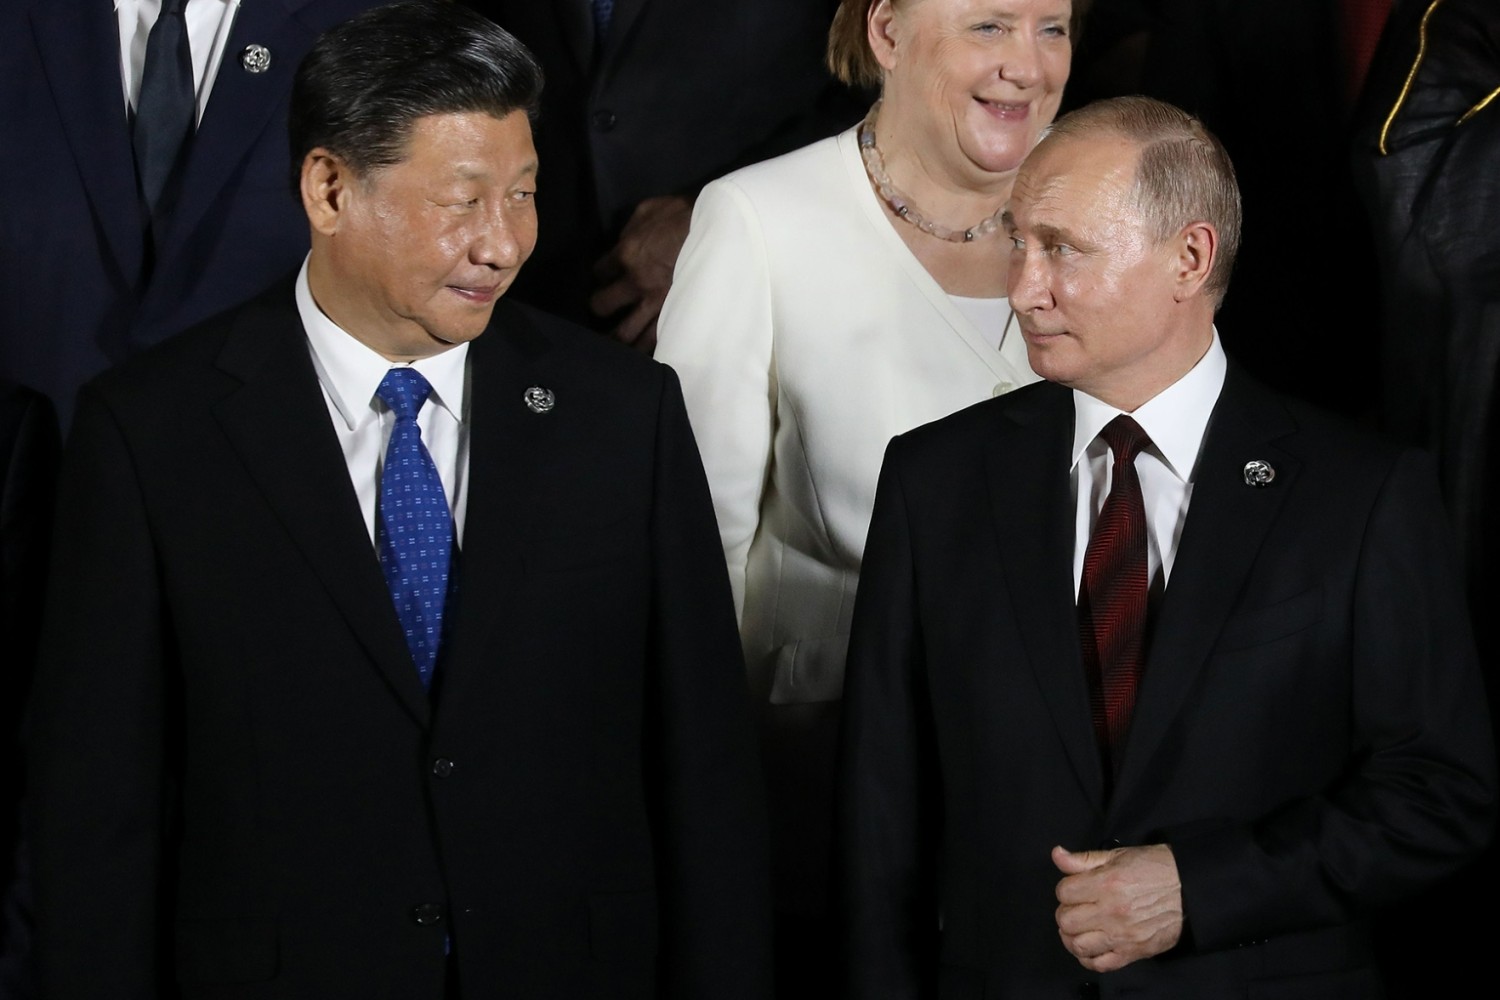 Chinese President Xi Jinping and Russian President Vladimir Putin pose for a group photo during the G-20 summit in Osaka, Japan, on June 28. DOMINIQUE JACOVIDES/AFP/GETTY IMAGES